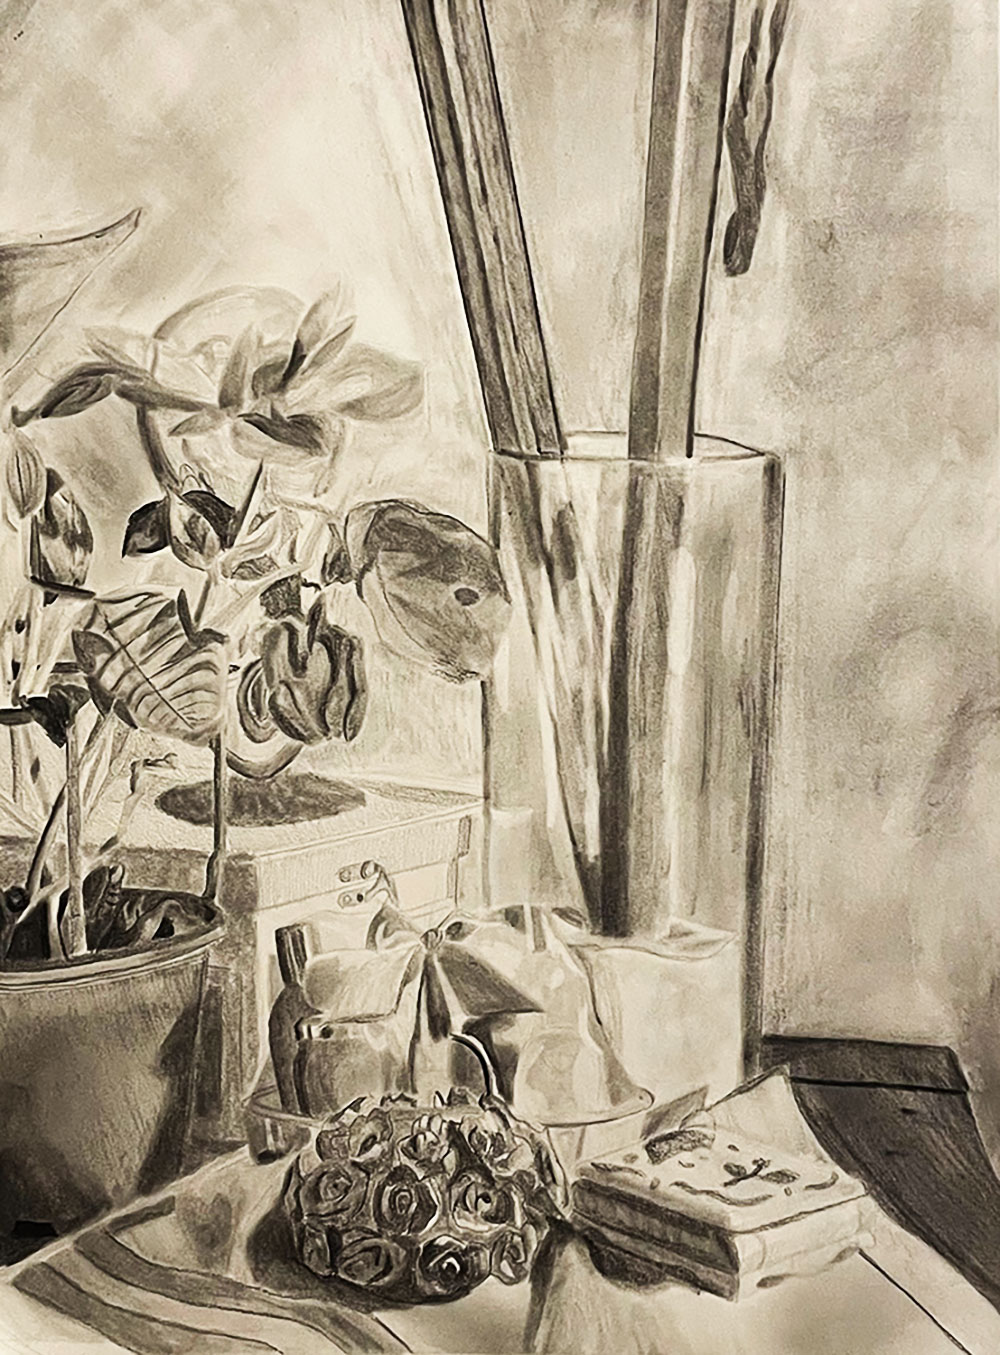 Charcoal drawing of still life includes: a vase of flowers, leaves, and a tablecloth